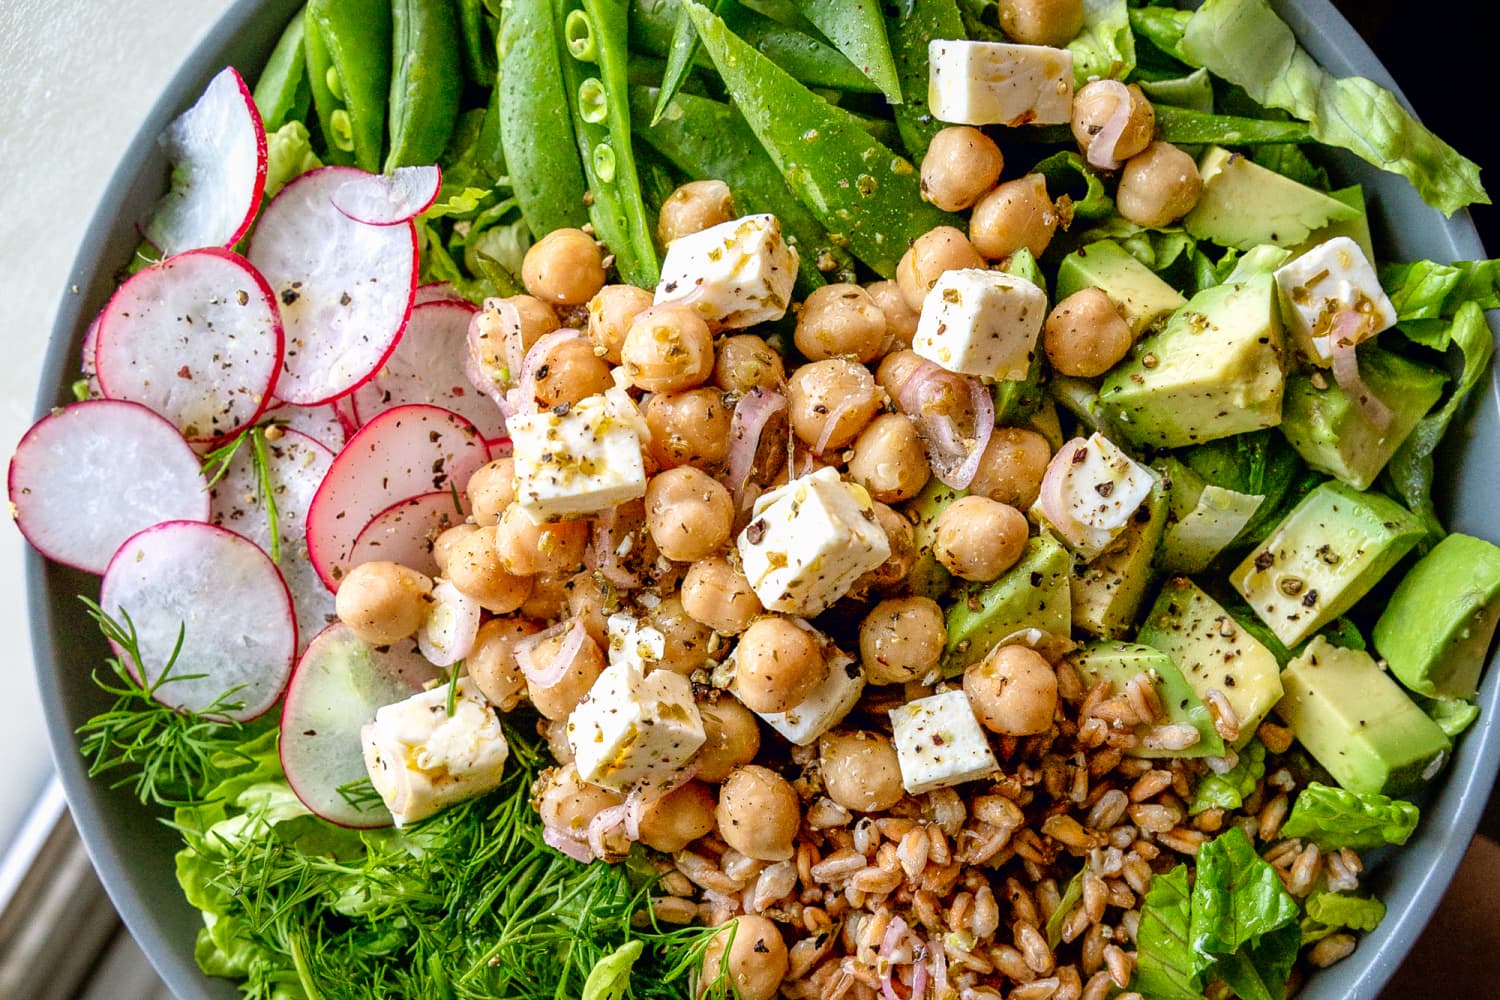 Marinated Chickpea and Feta Salad with Spring Veggies | The Kitchn